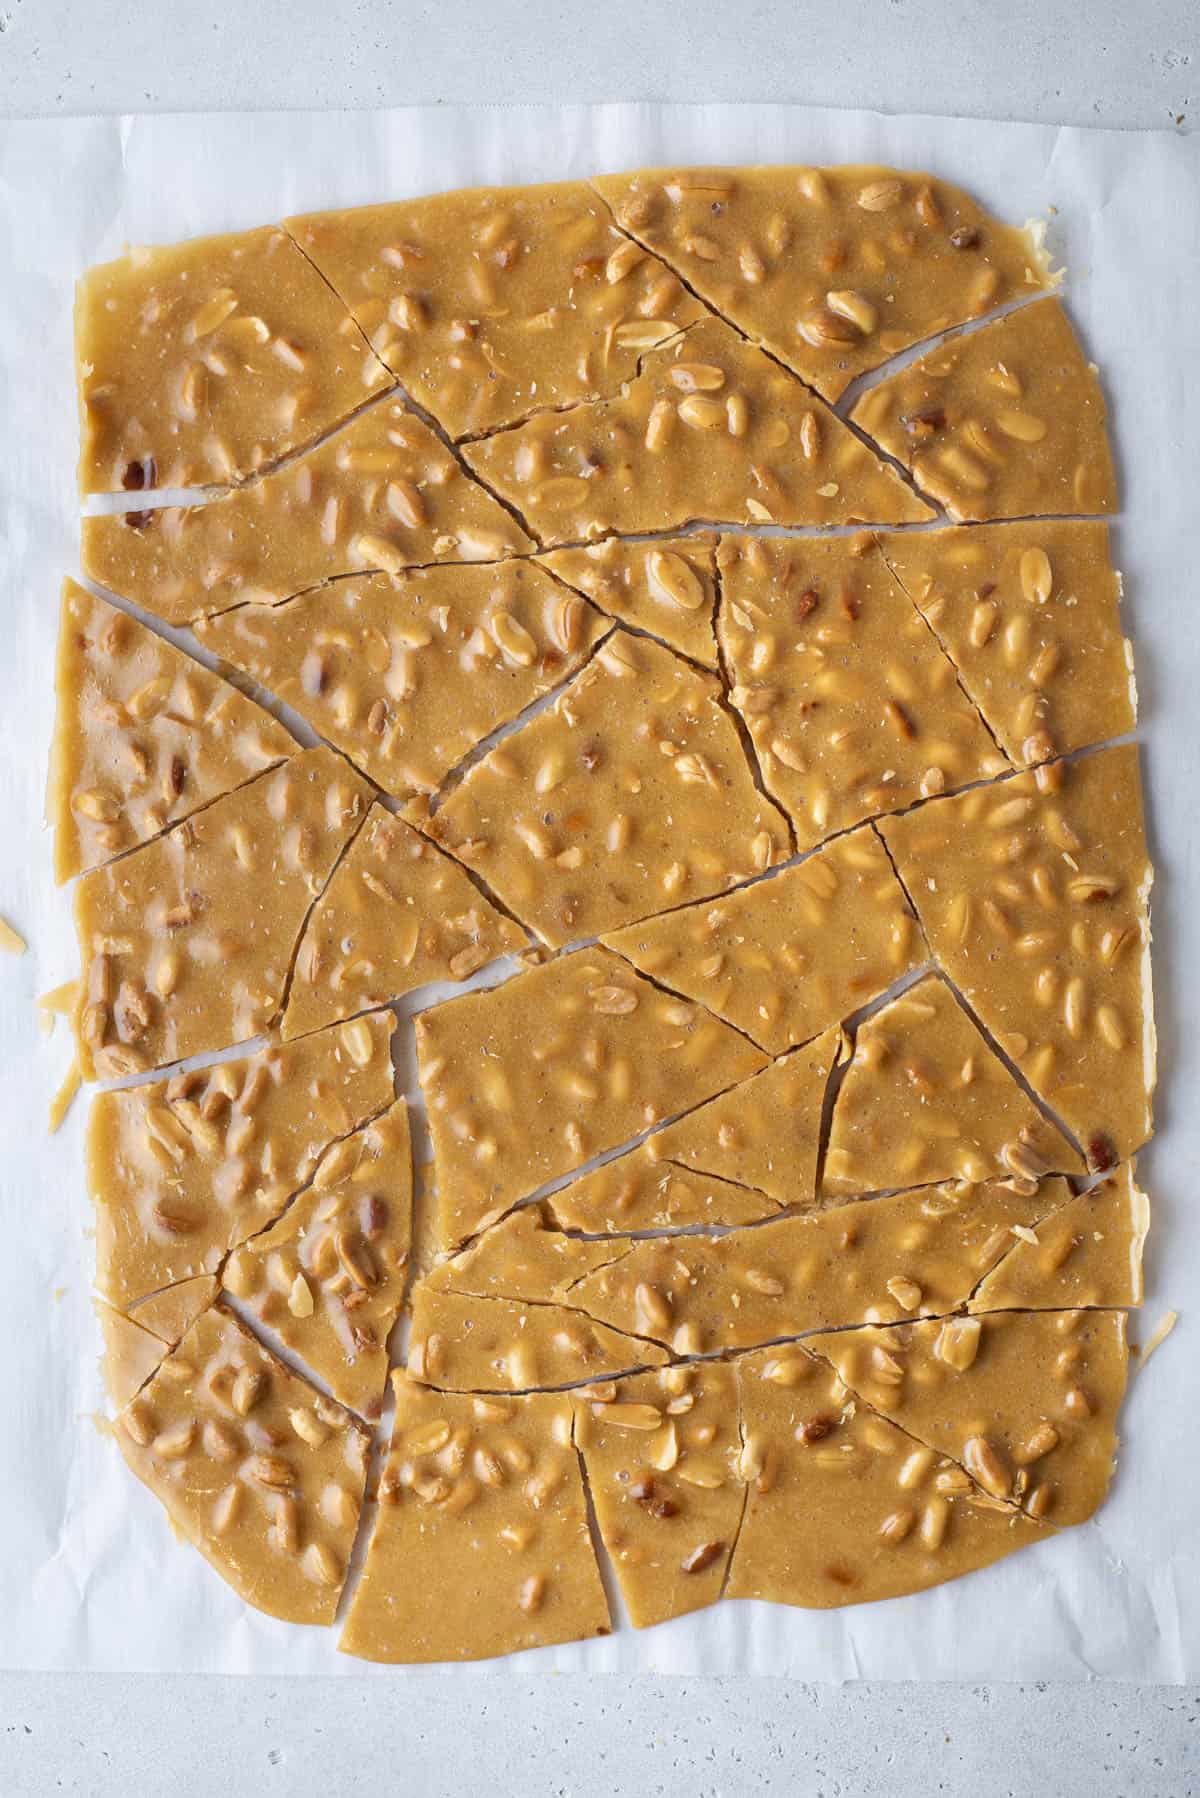 peanut brittle broken into pieces on a baking sheet lined with parchment paper